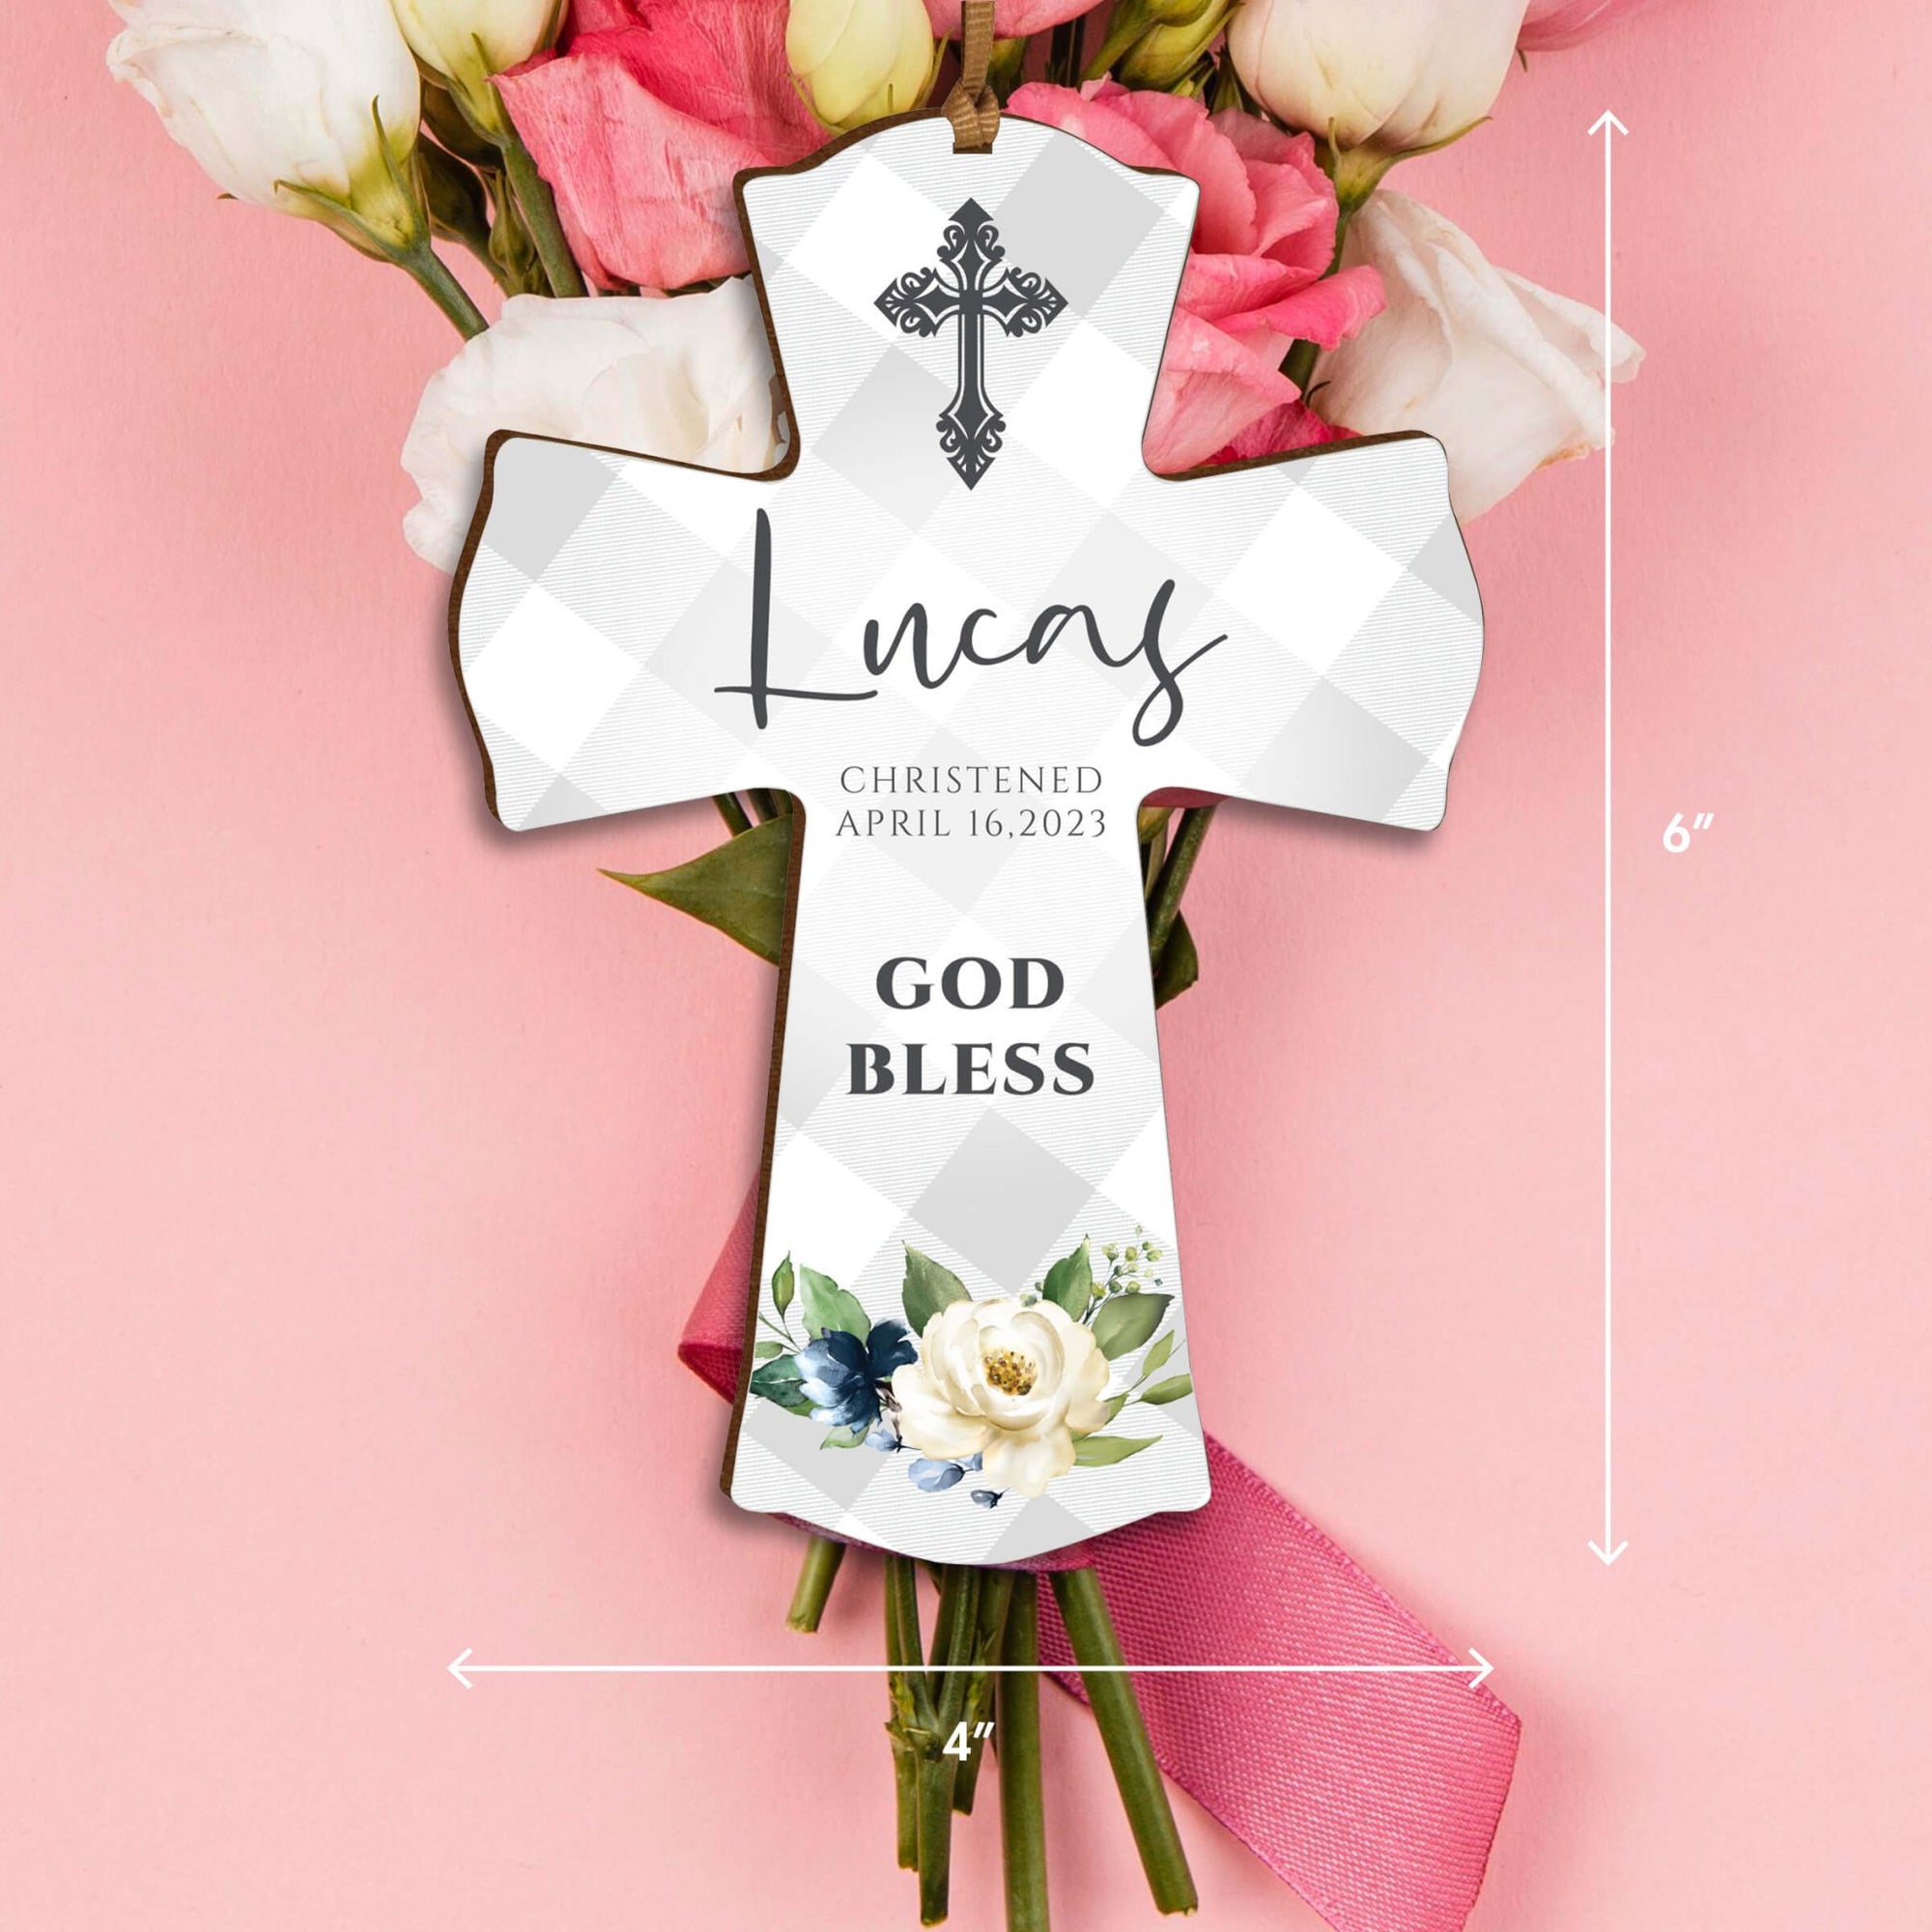 Personalized Christening Wooden Hanging Mini Cross - God Bless - LifeSong Milestones